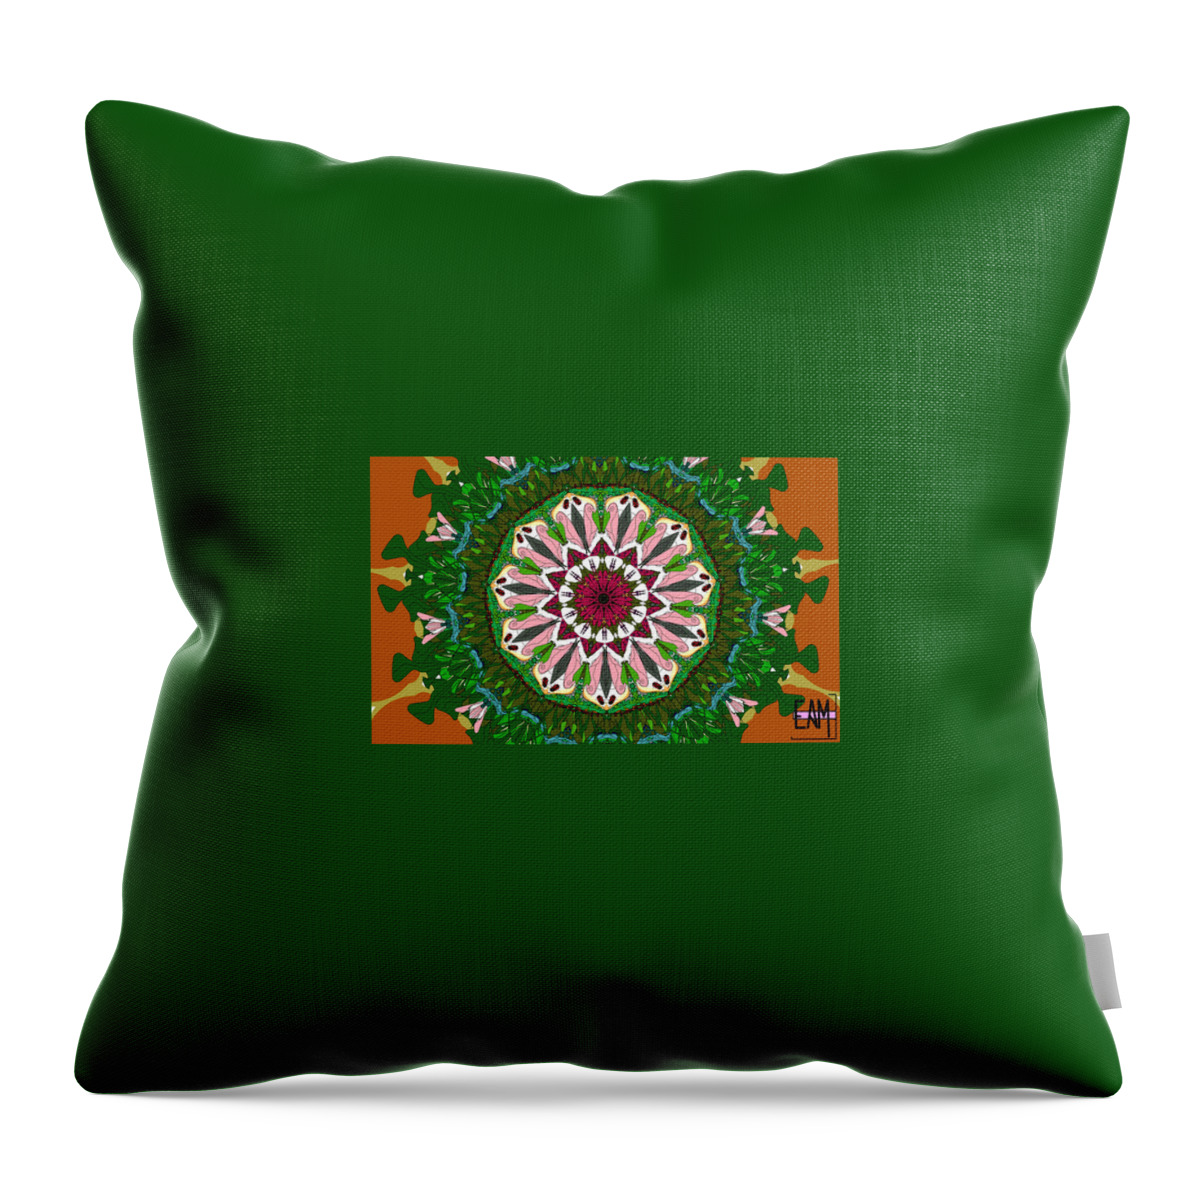 Garden Party #2 Throw Pillow featuring the digital art Garden Party #2 by Elizabeth McTaggart